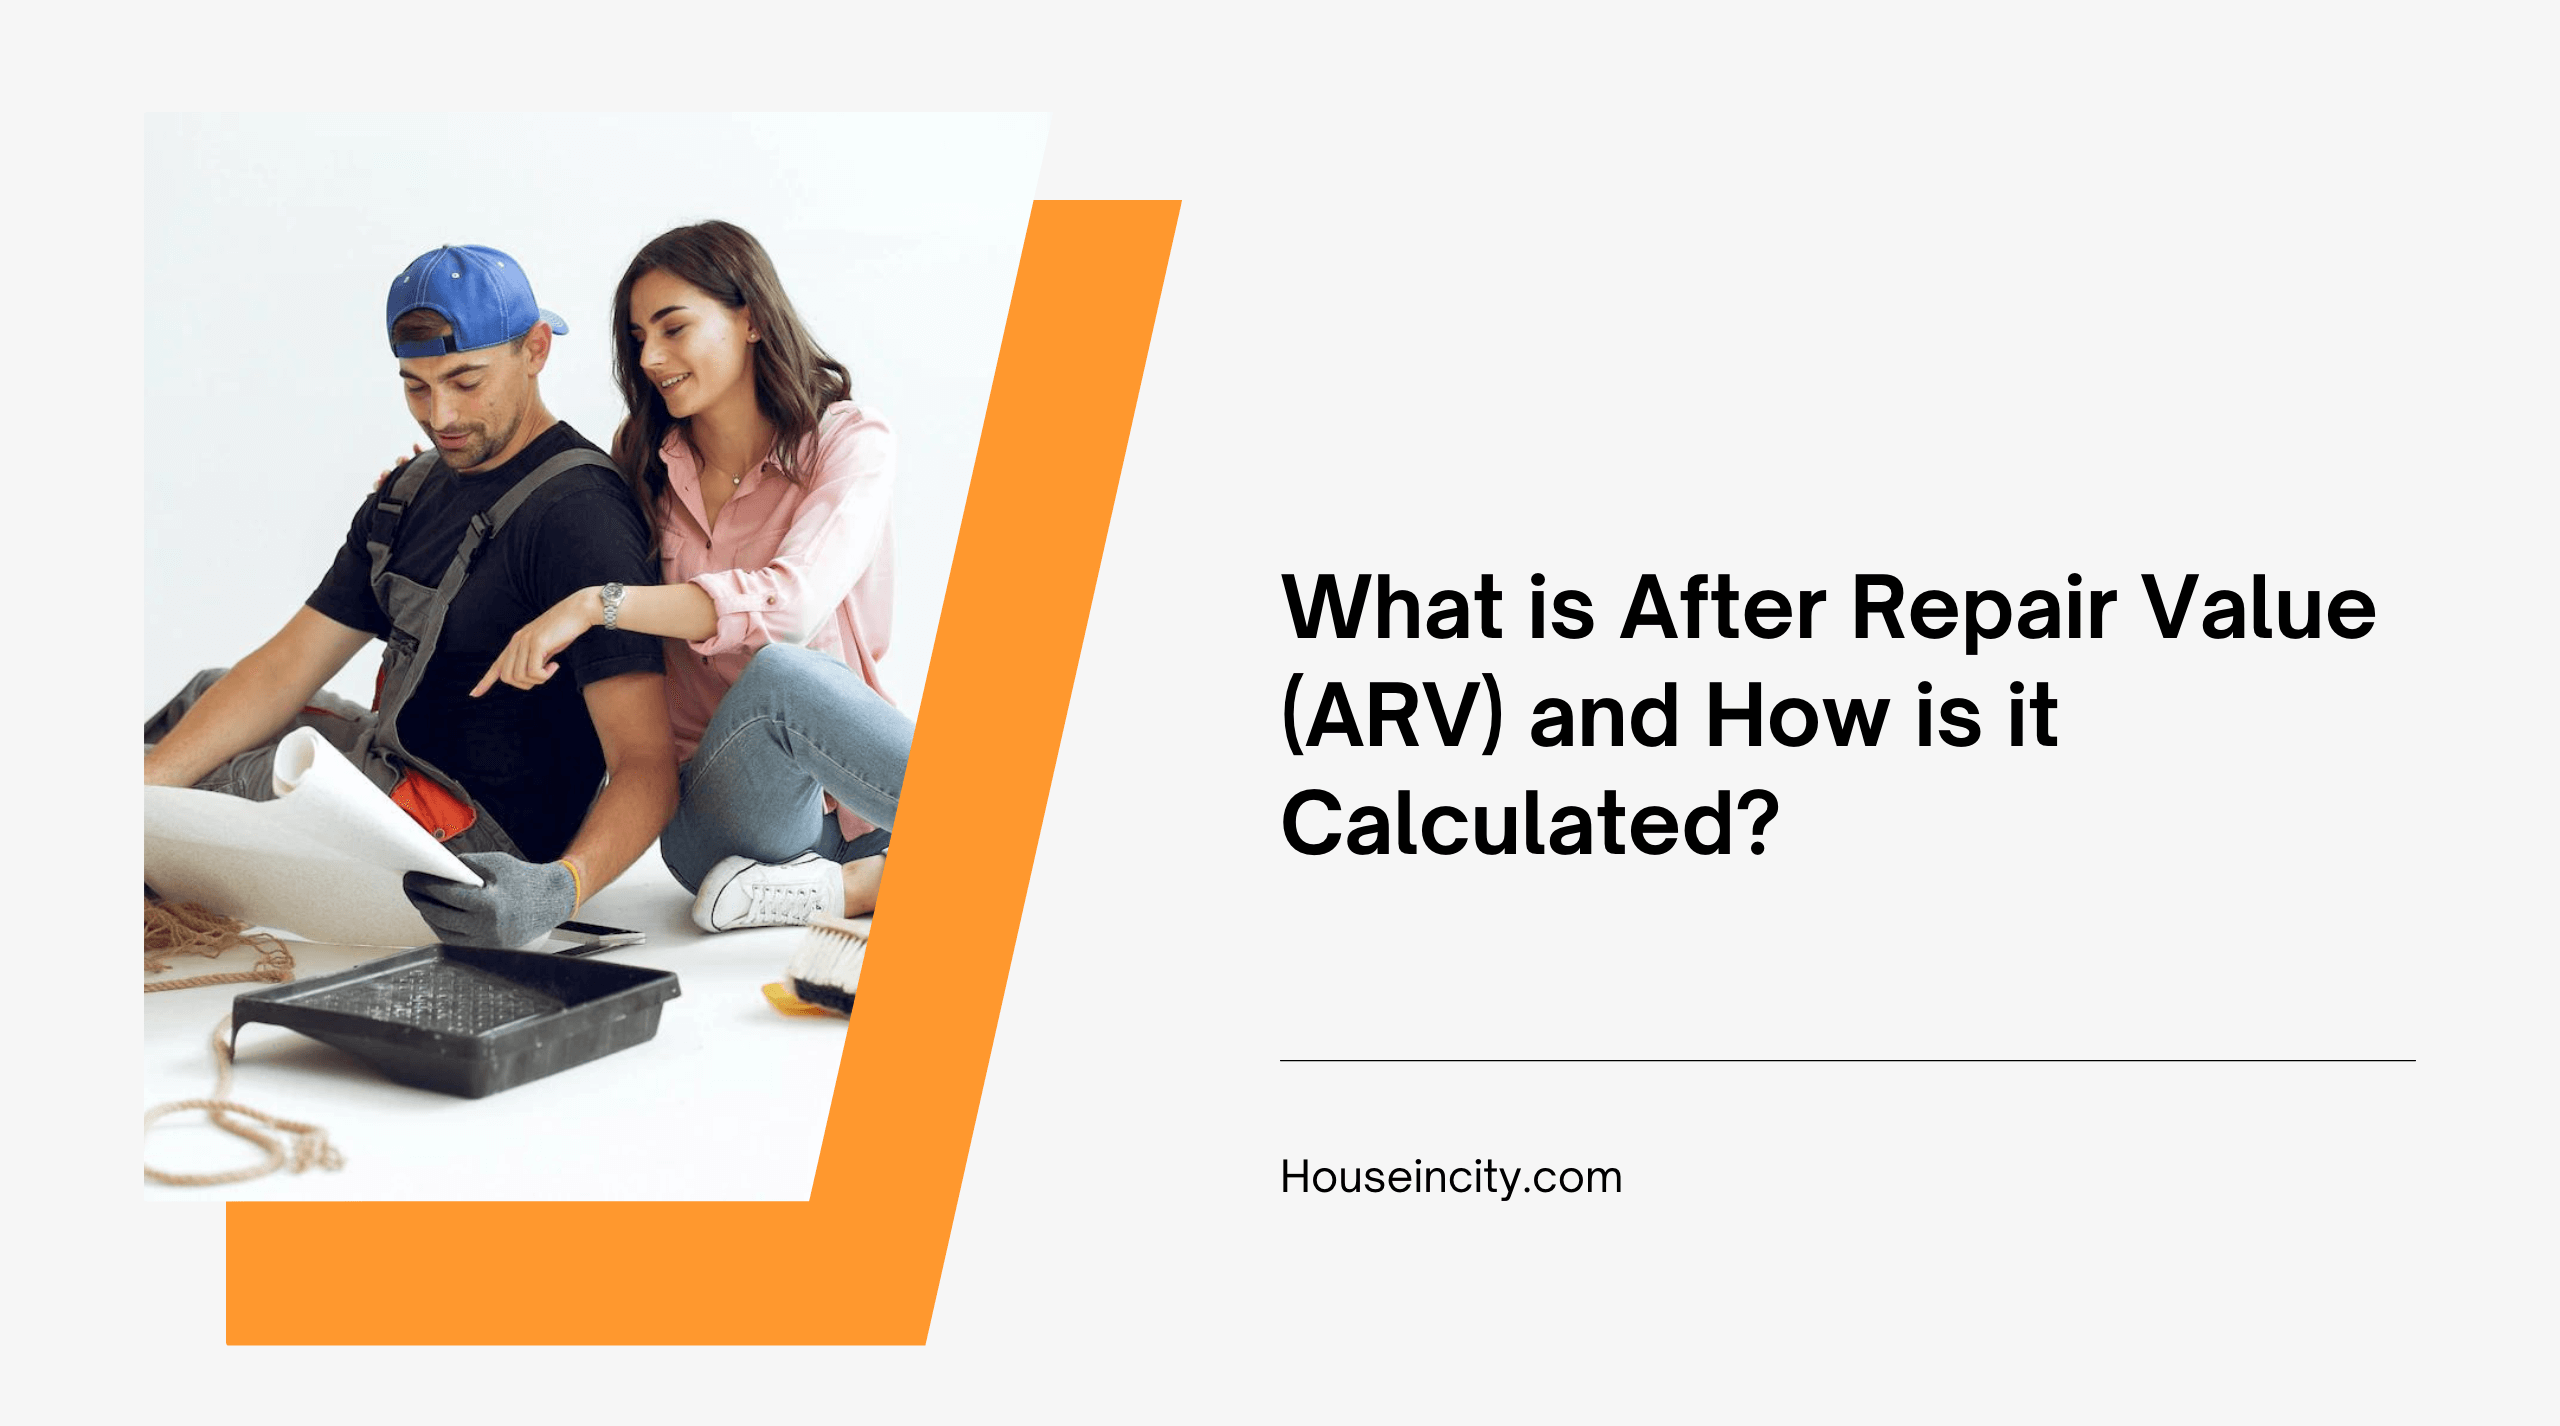 What is After Repair Value (ARV) and How is it Calculated?